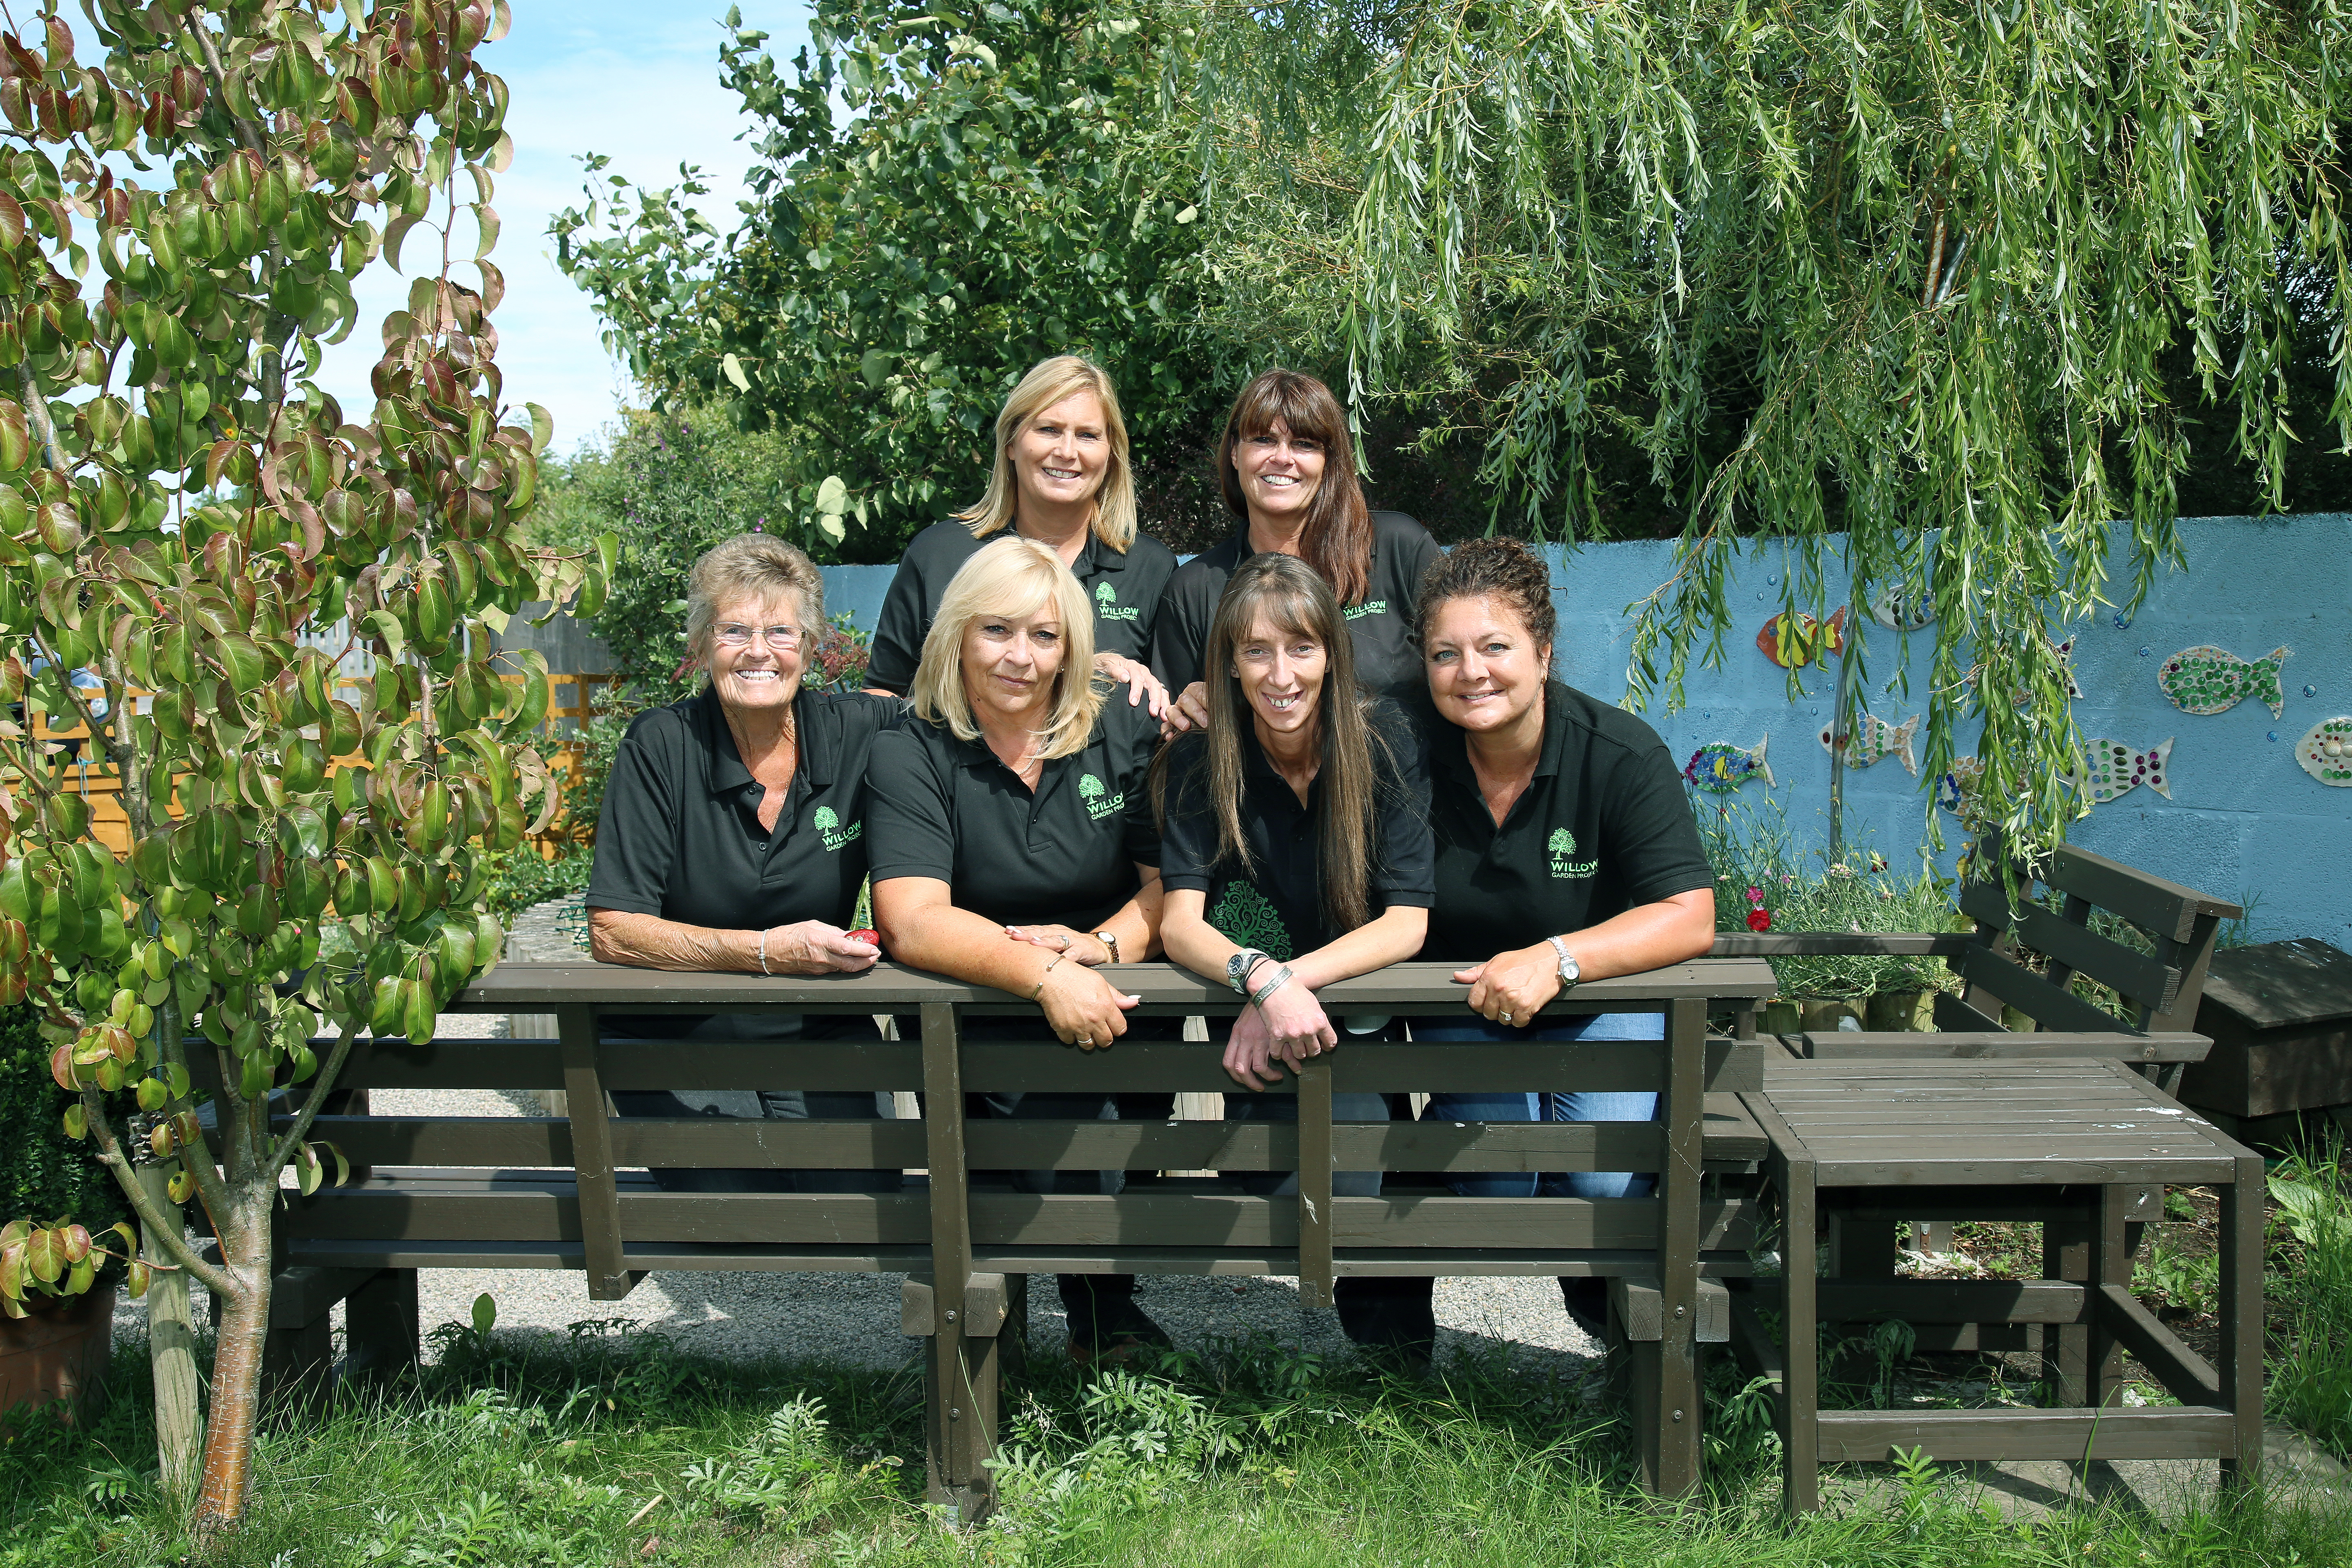 Willow Garden project featured in Lancashire Life magazine